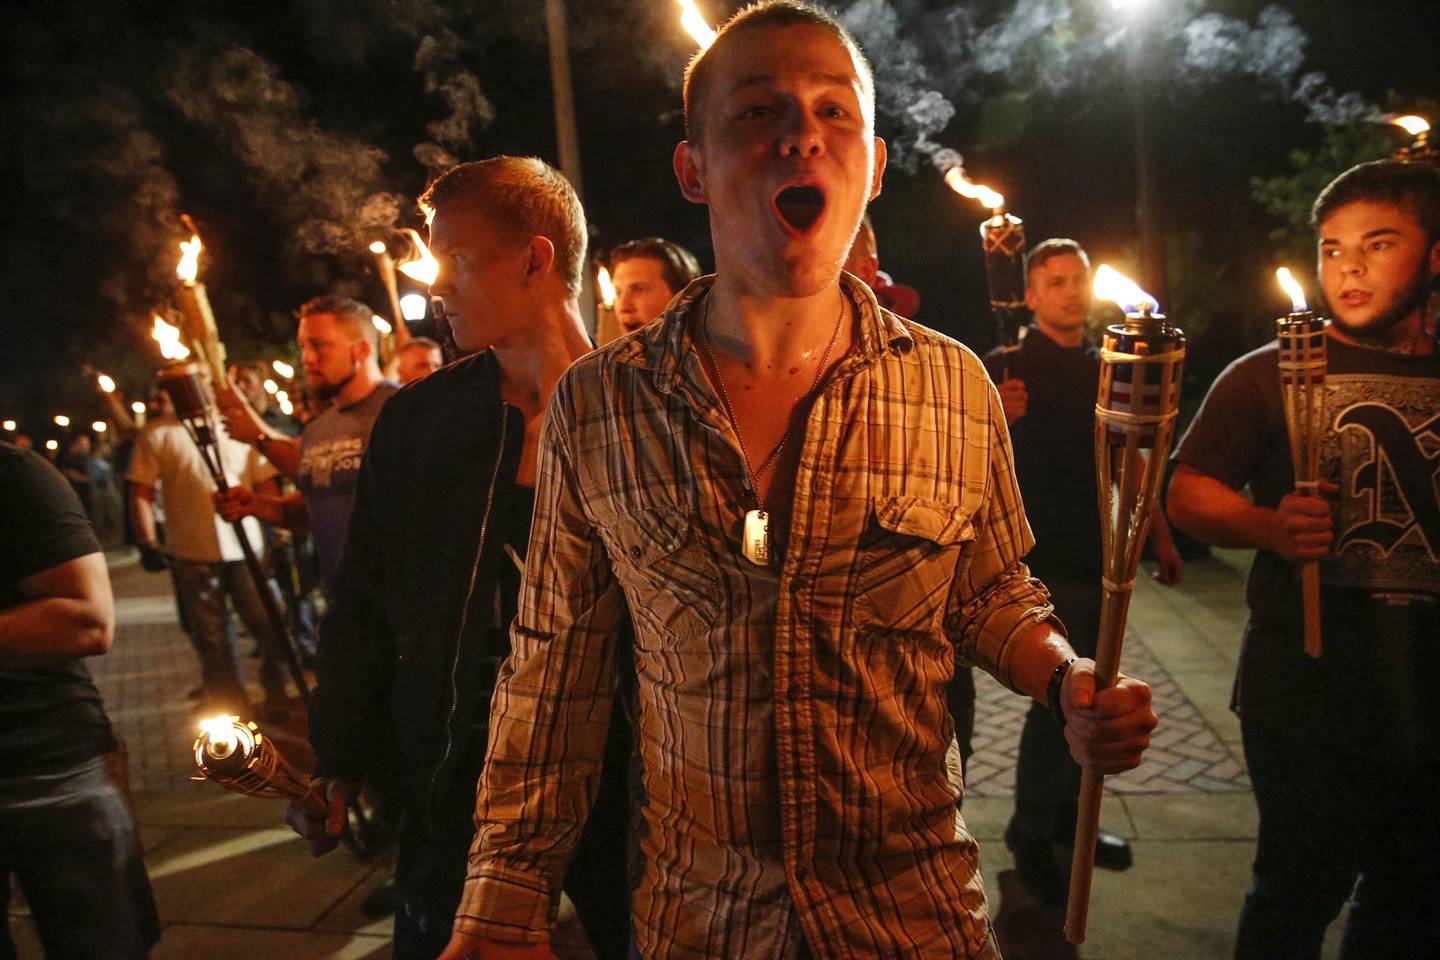 In this photo taken Friday, Aug. 11, 2017, multiple white nationalist groups march with torches through the UVA campus in Charlottesville, Va.   Hundreds of people chanted, threw punches, hurled water bottles and unleashed chemical sprays on each other Saturday after violence erupted at a white nationalist rally in Virginia.  (Mykal McEldowney/The Indianapolis Star via AP)